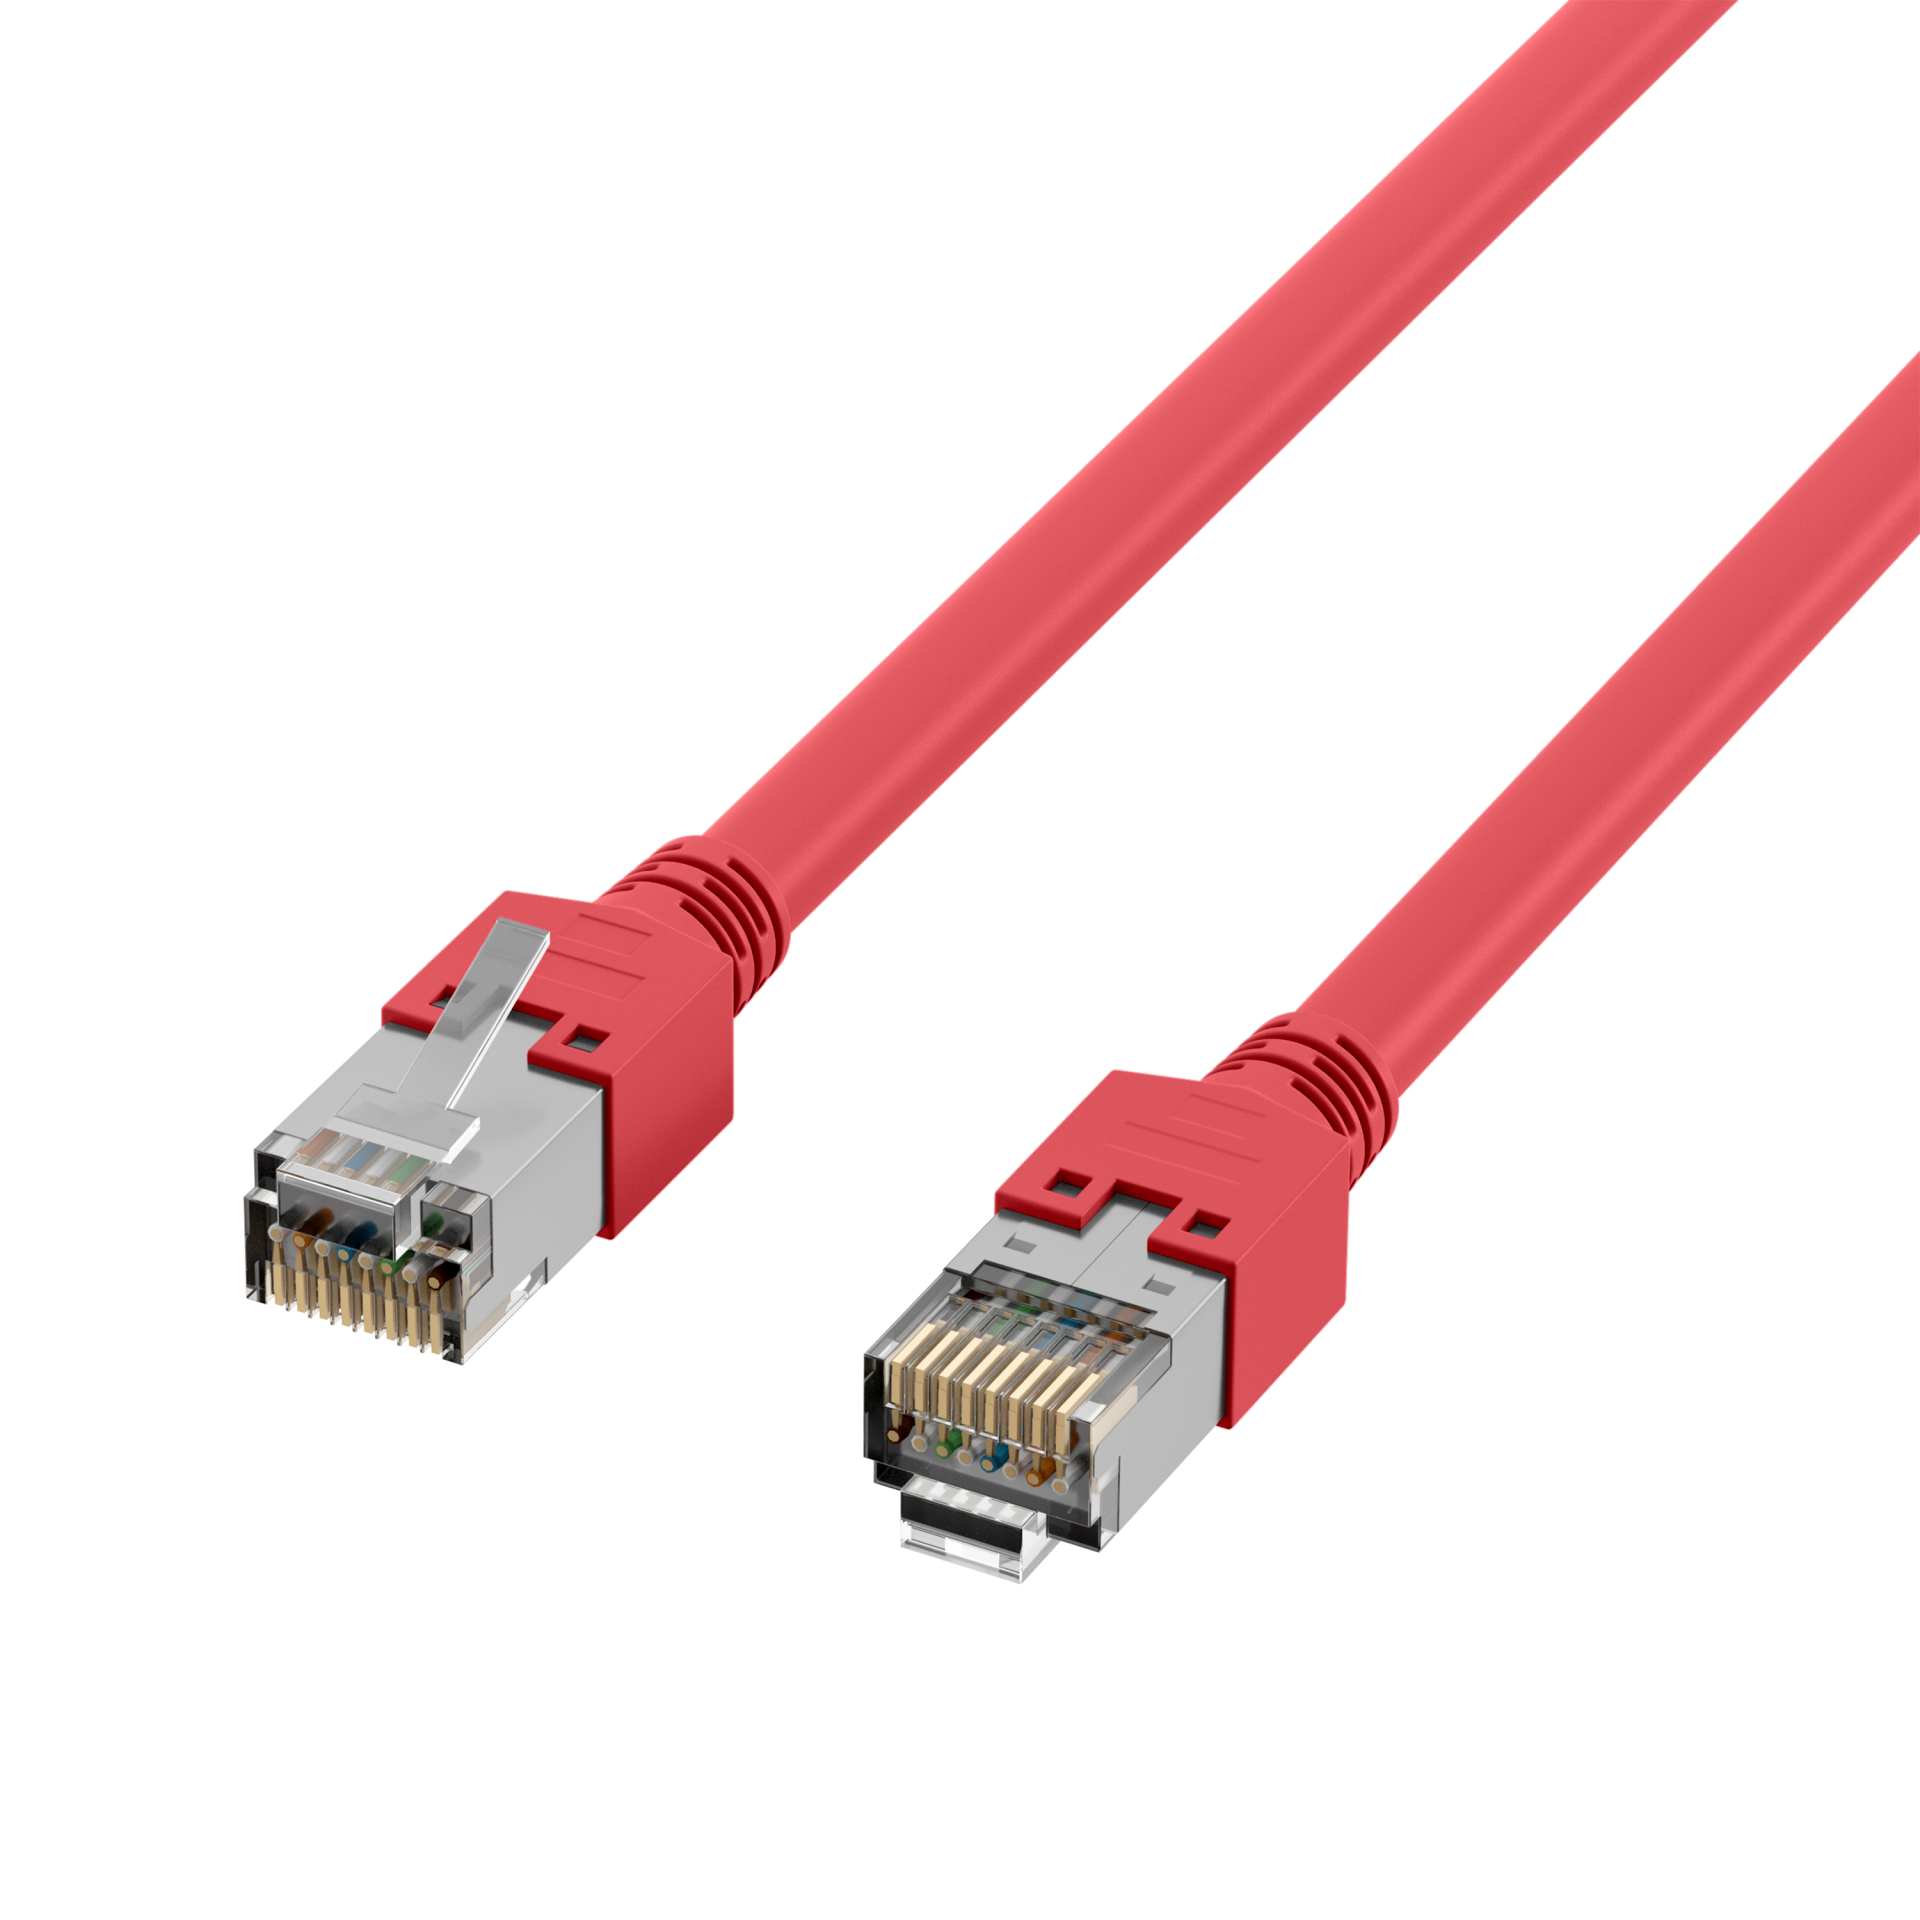 RJ45 Patch Cord Cat.5e S/UTP PVCDätwyler 5502 TM11 red 20m